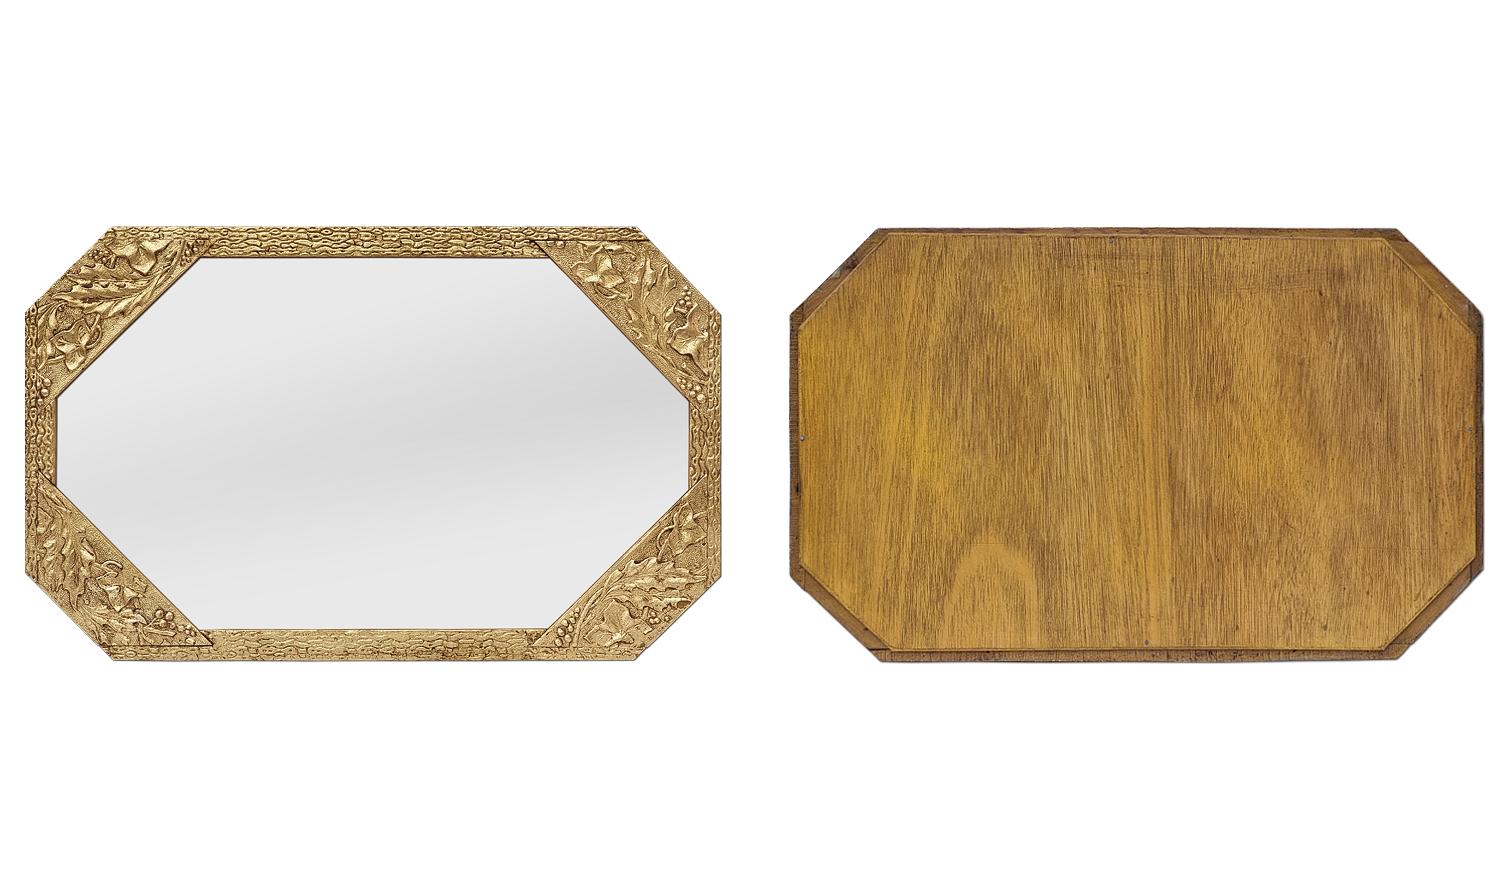 Antique French Octagonal Giltwood Wall Mirror, Art Nouveau Style circa 1900 For Sale 2